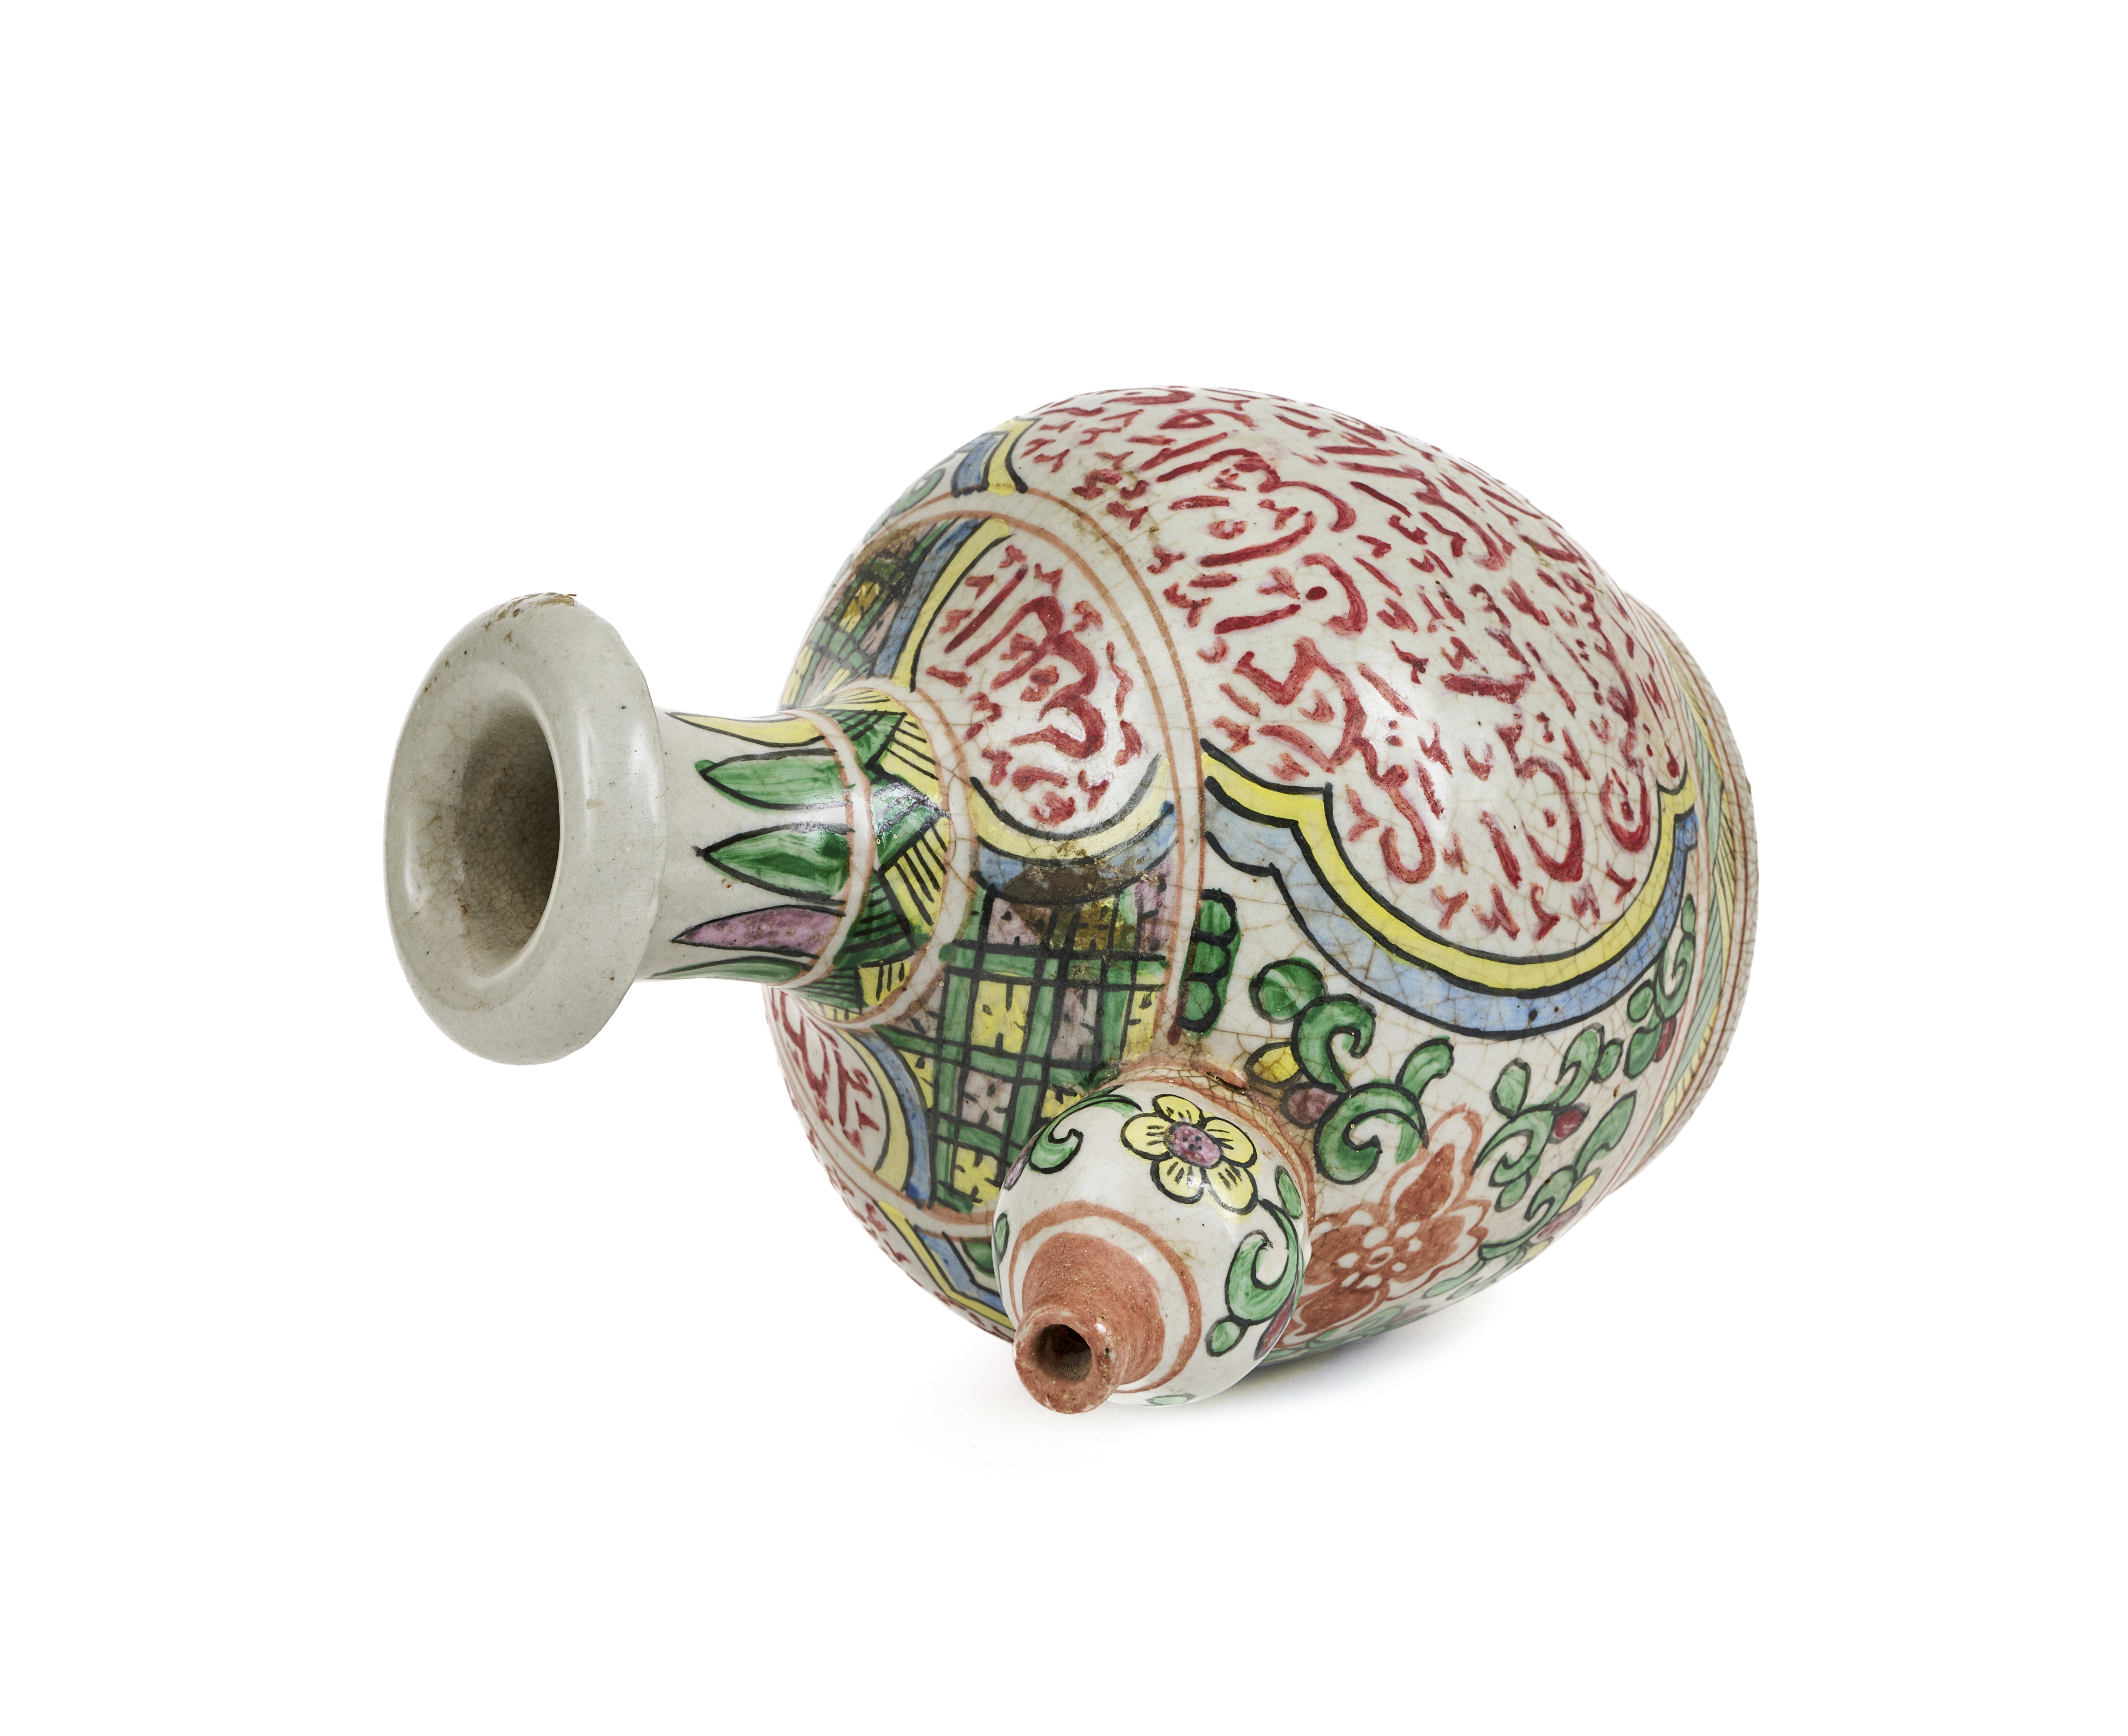 A LARGE CHINESE POLYCHROME PAINTED KENDI WITH ISLAMIC INSCRIPTION, 19TH CENTURY - Image 4 of 4